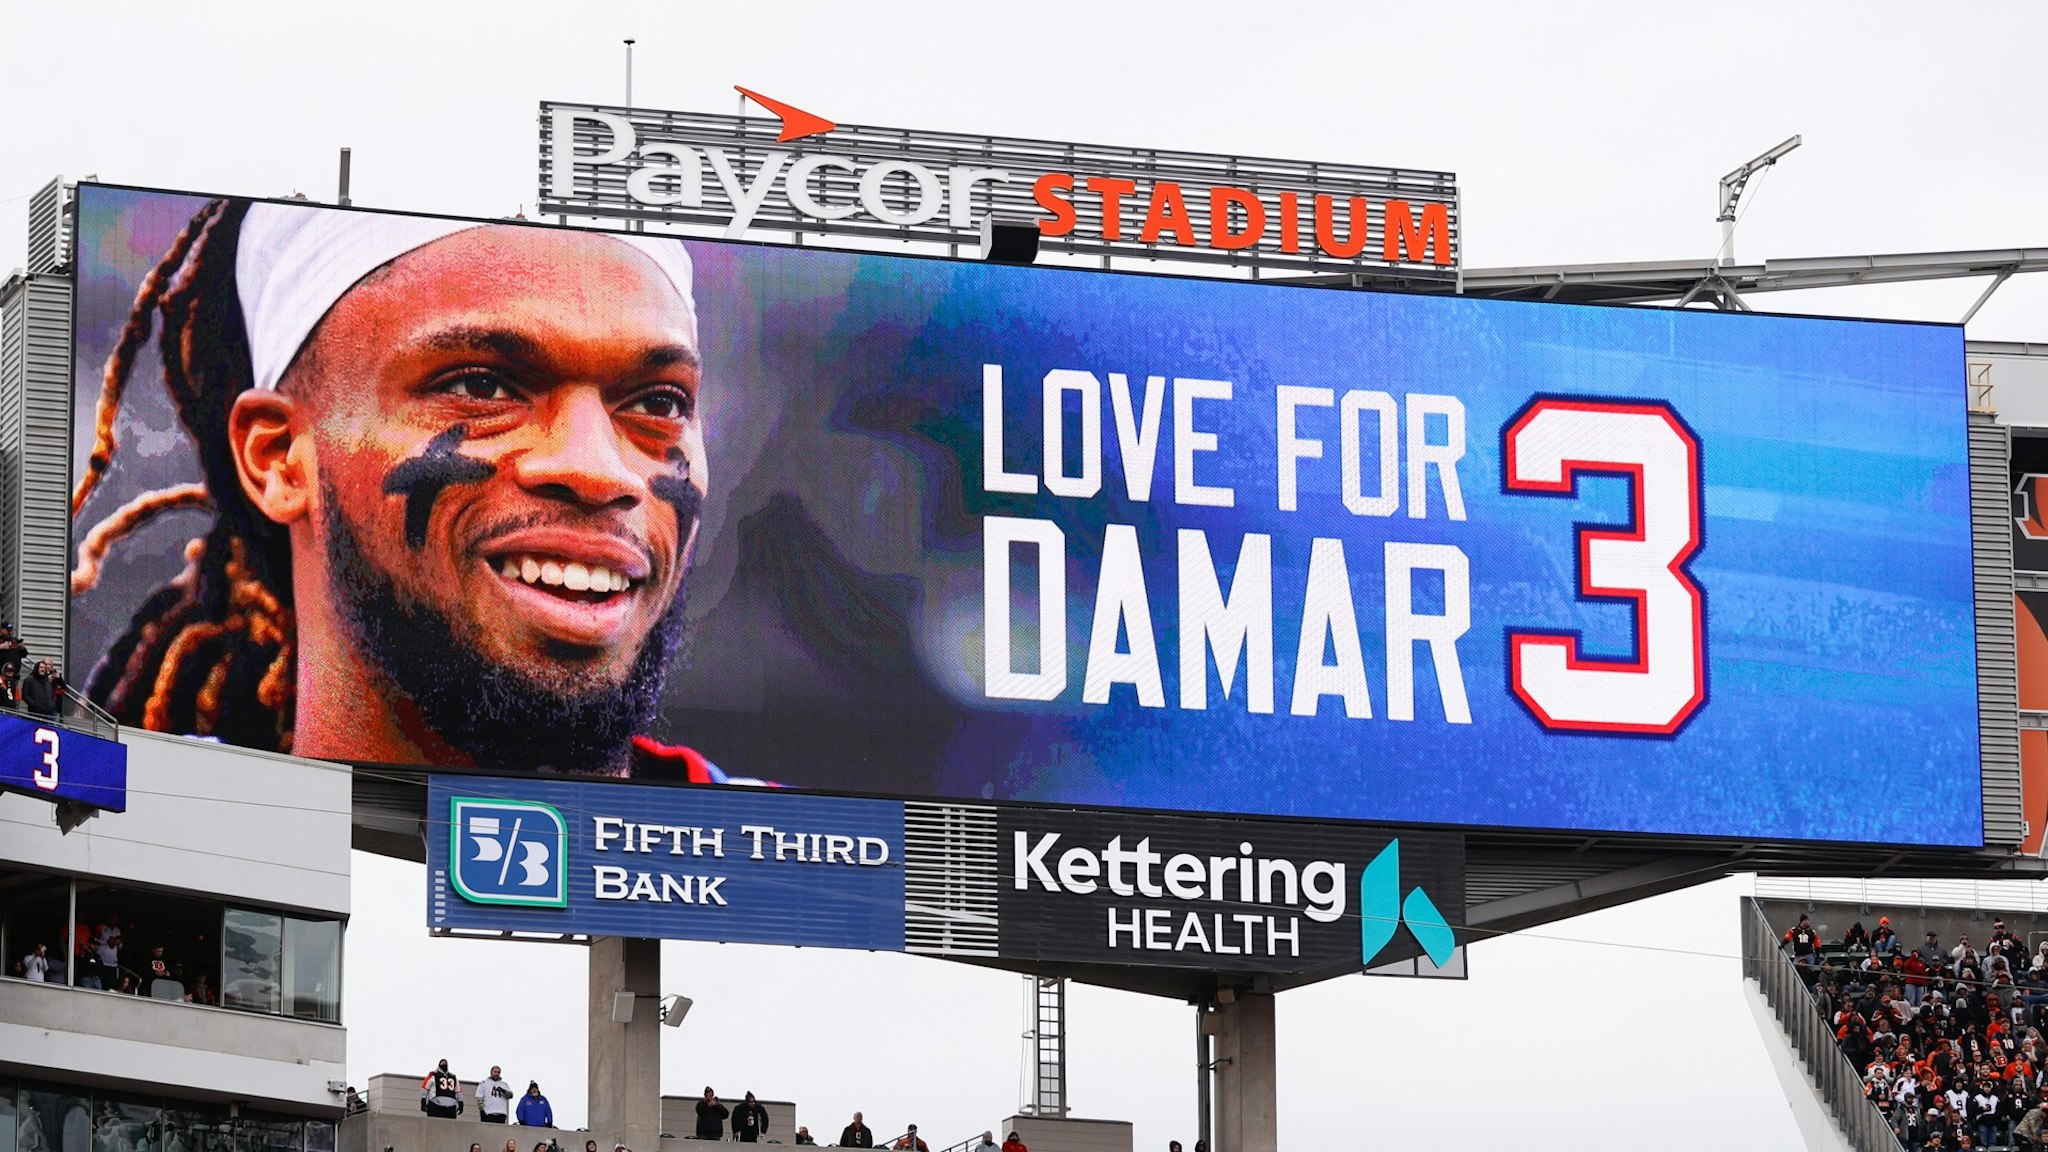 Love for Damar is displayed on the scoreboard for Buffalo Bills Damar Hamlin before the game against the Baltimore Ravens and the Cincinnati Bengals on January 8, 2023, at Paycor Stadium in Cincinnati, OH.